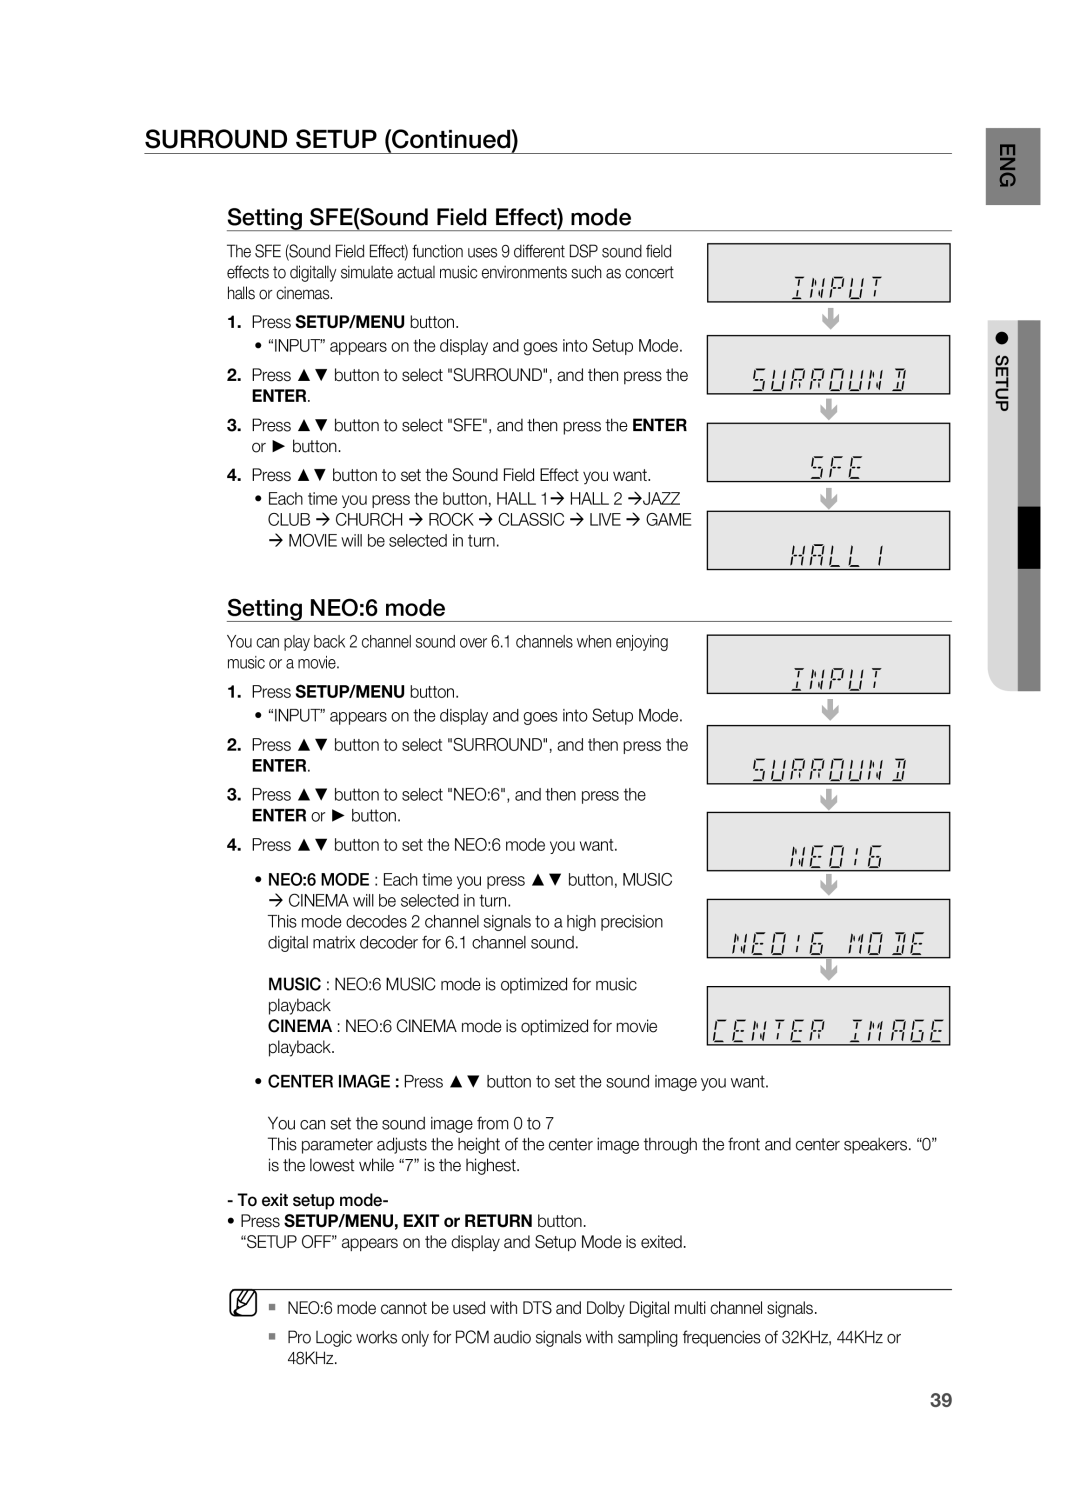 Samsung HT-AS730ST user manual Setting SFESound Field Effect mode, Setting NEO:6 mode 